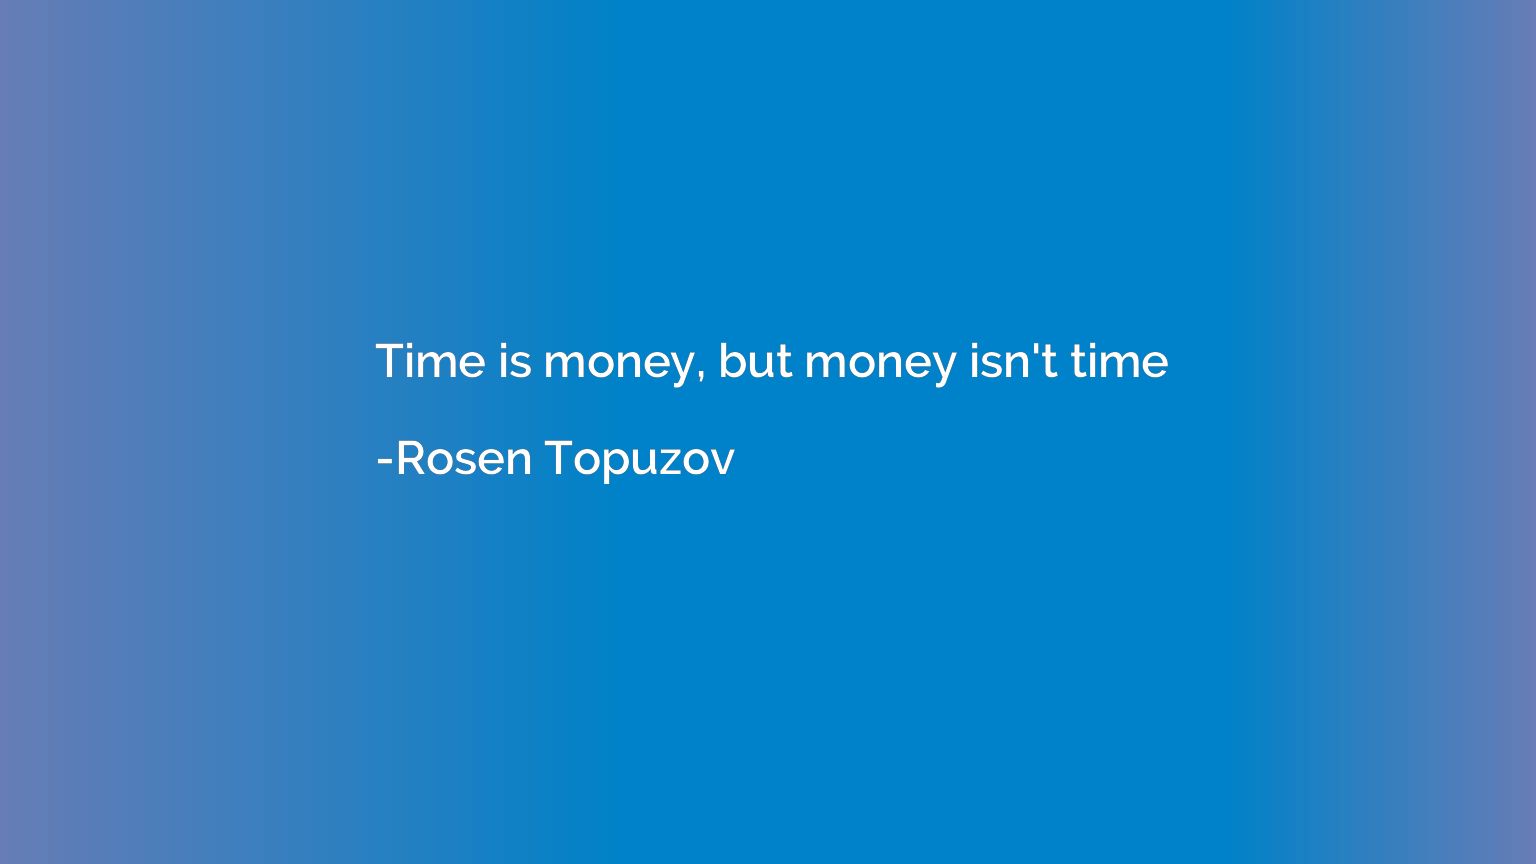 Time is money, but money isn't time